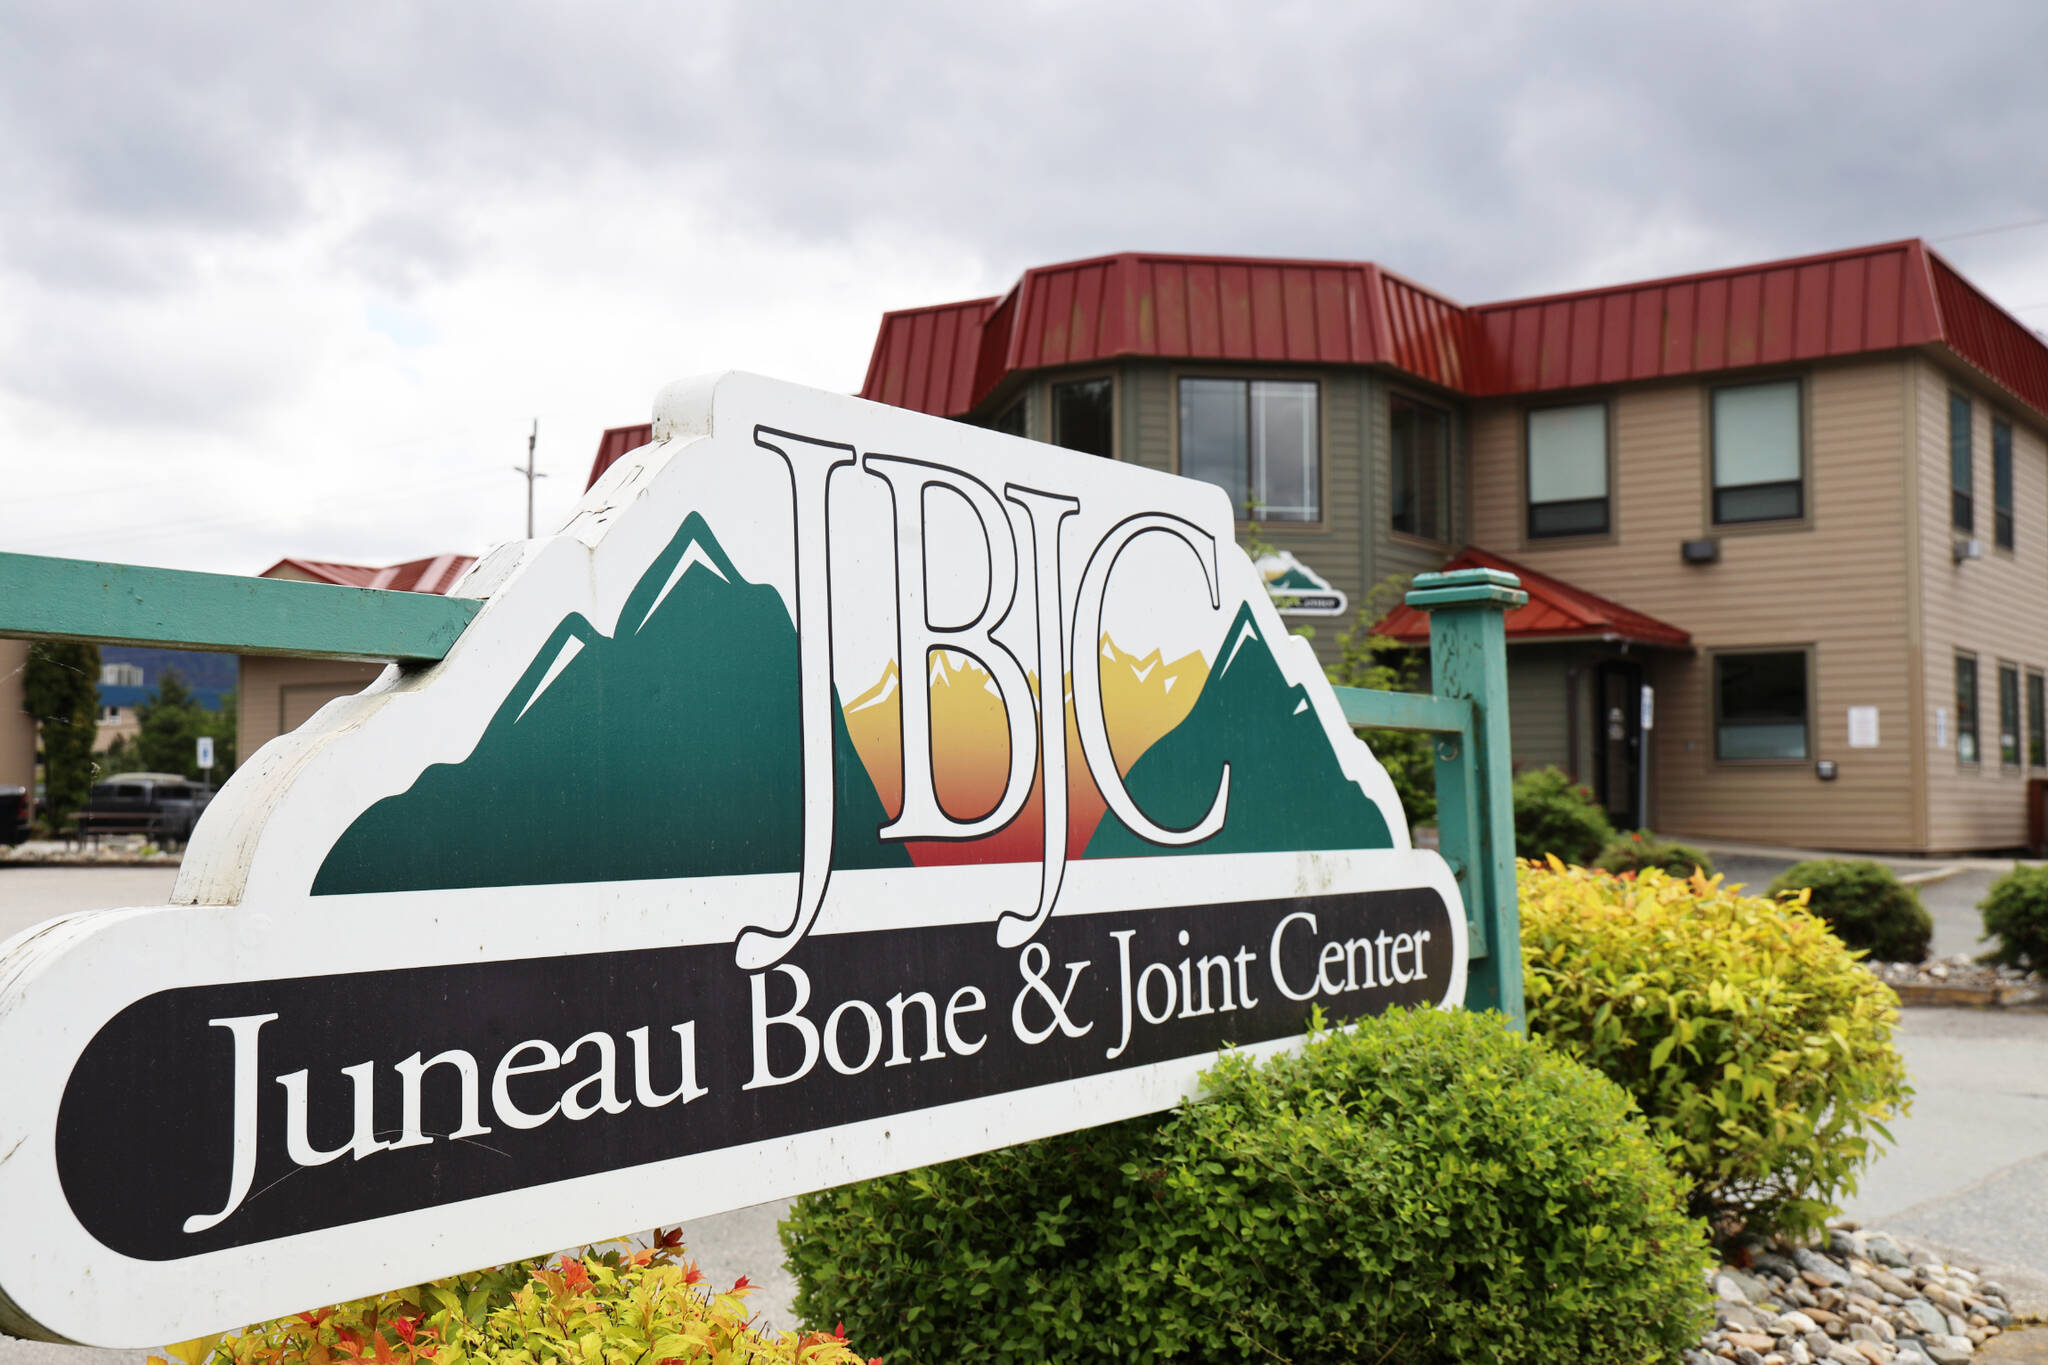 On Monday night during the City and Borough of Juneau Assembly meeting, members OK’d appropriating $8.1 million in hospital funds to Bartlett Regional Hospital for the purchase of Juneau Bone and Joint Center’s buildings and property. (Clarise Larson / Juneau Empire)